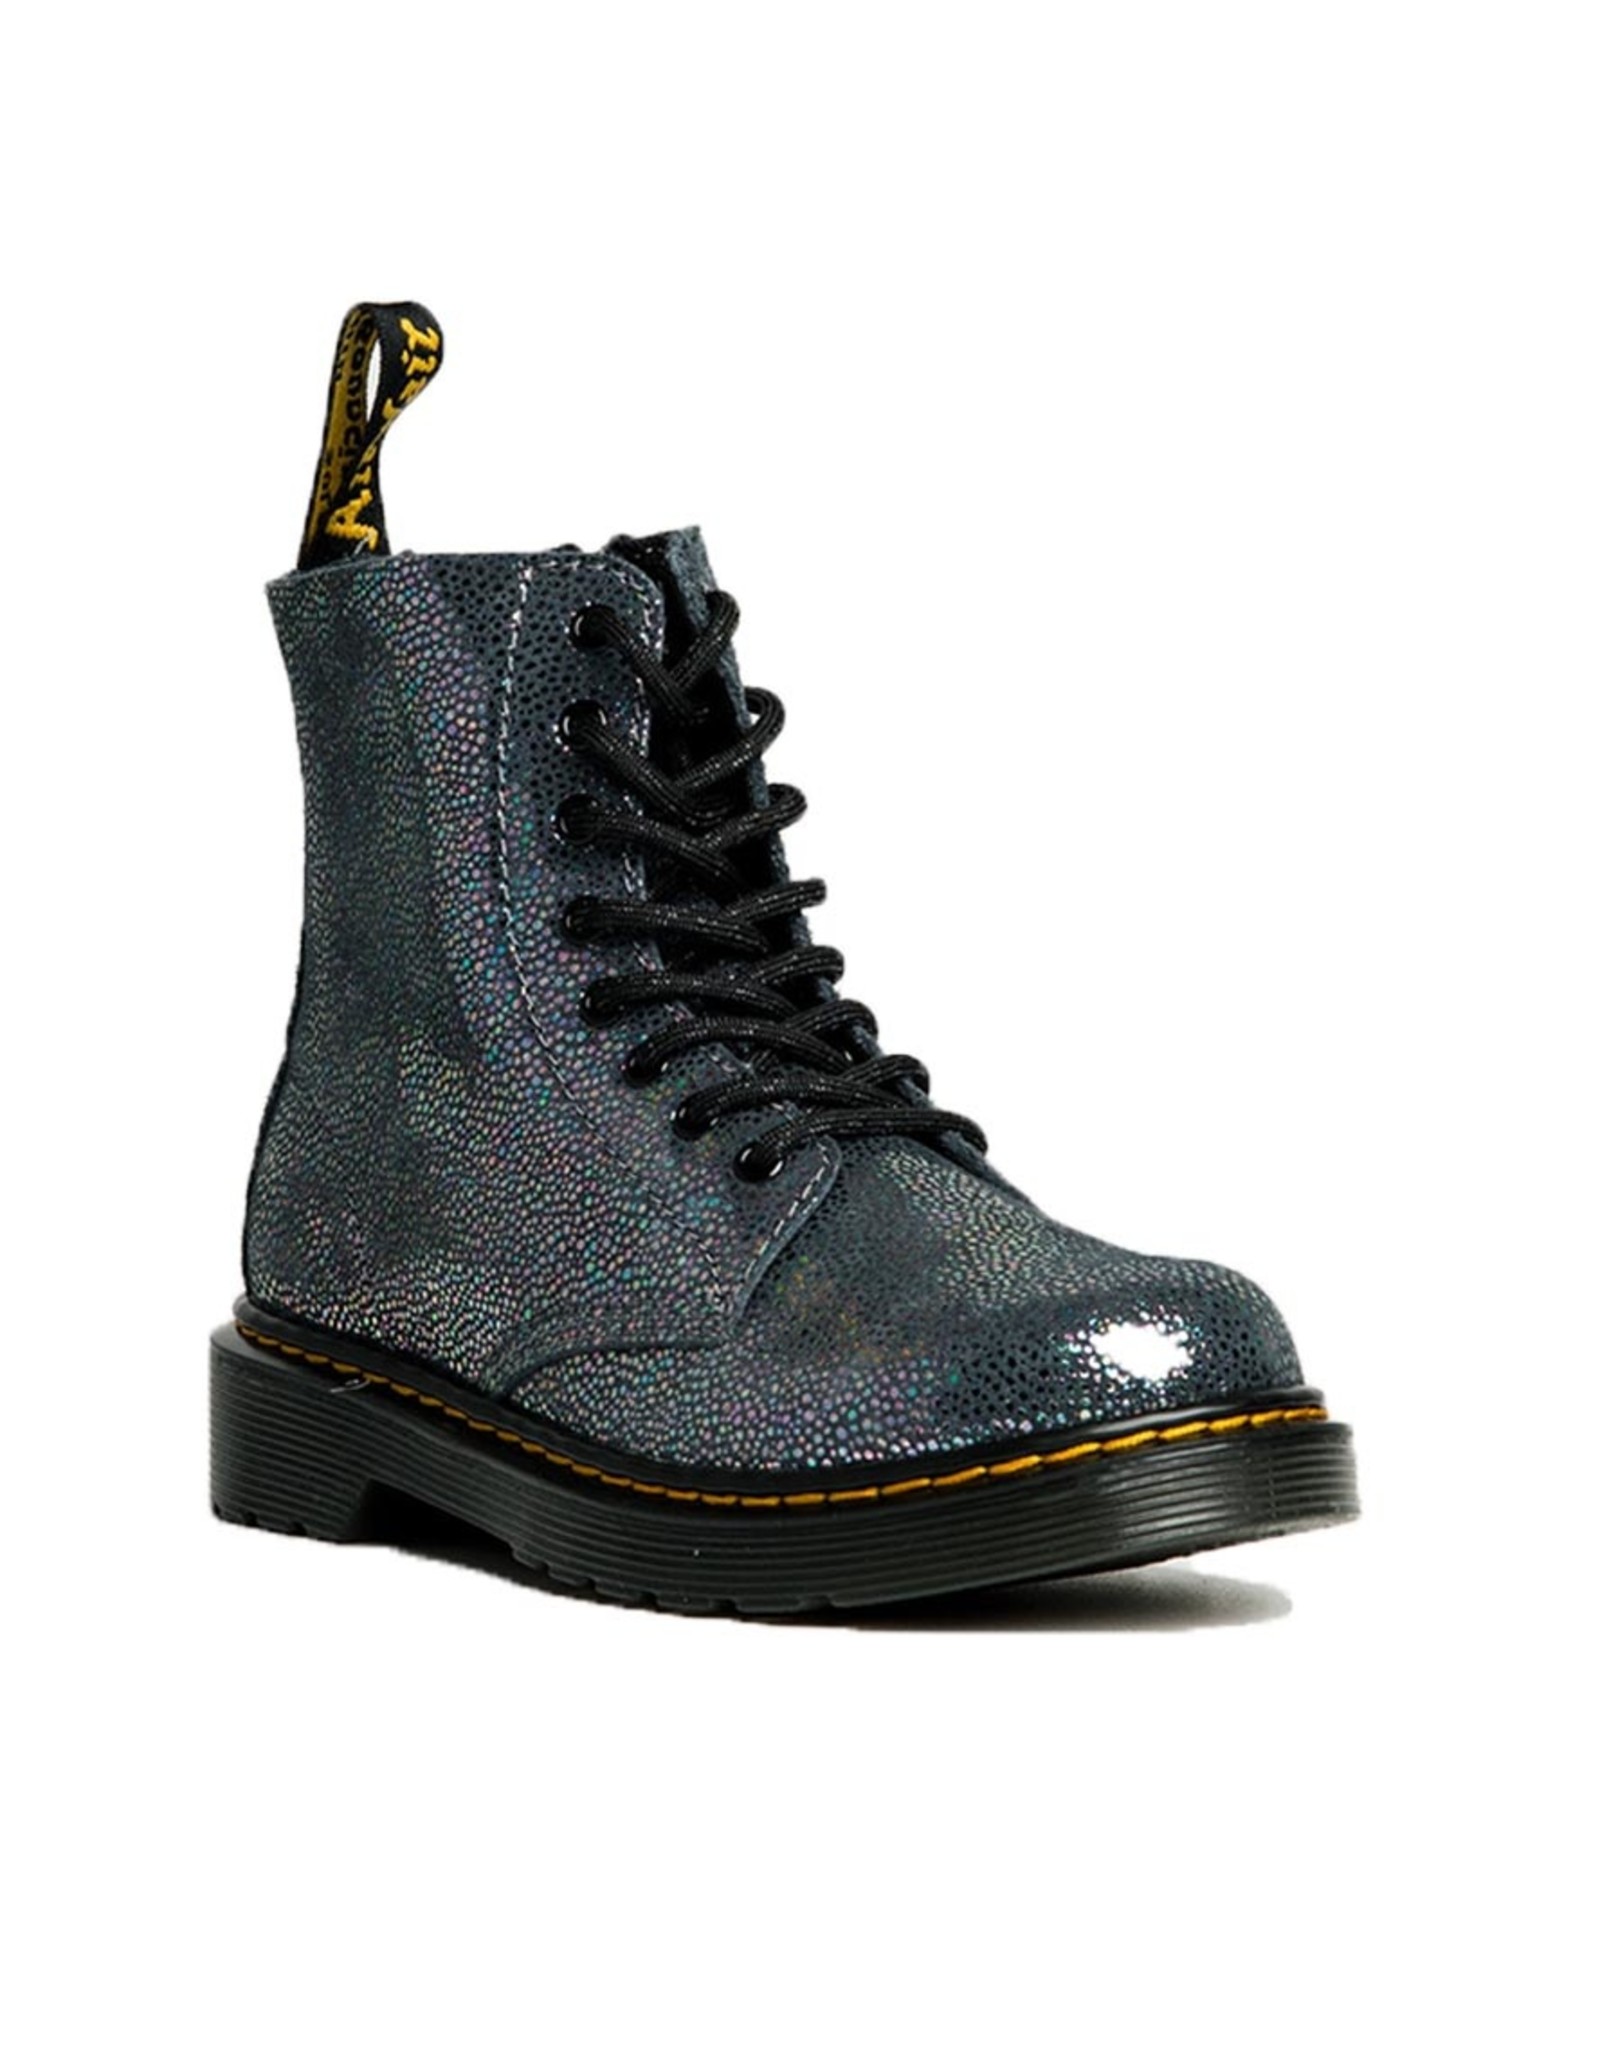 DR. MARTENS 1460 PASCAL YOUTH IRIDESCENT KIDRAY Y815YIRI-R26973508